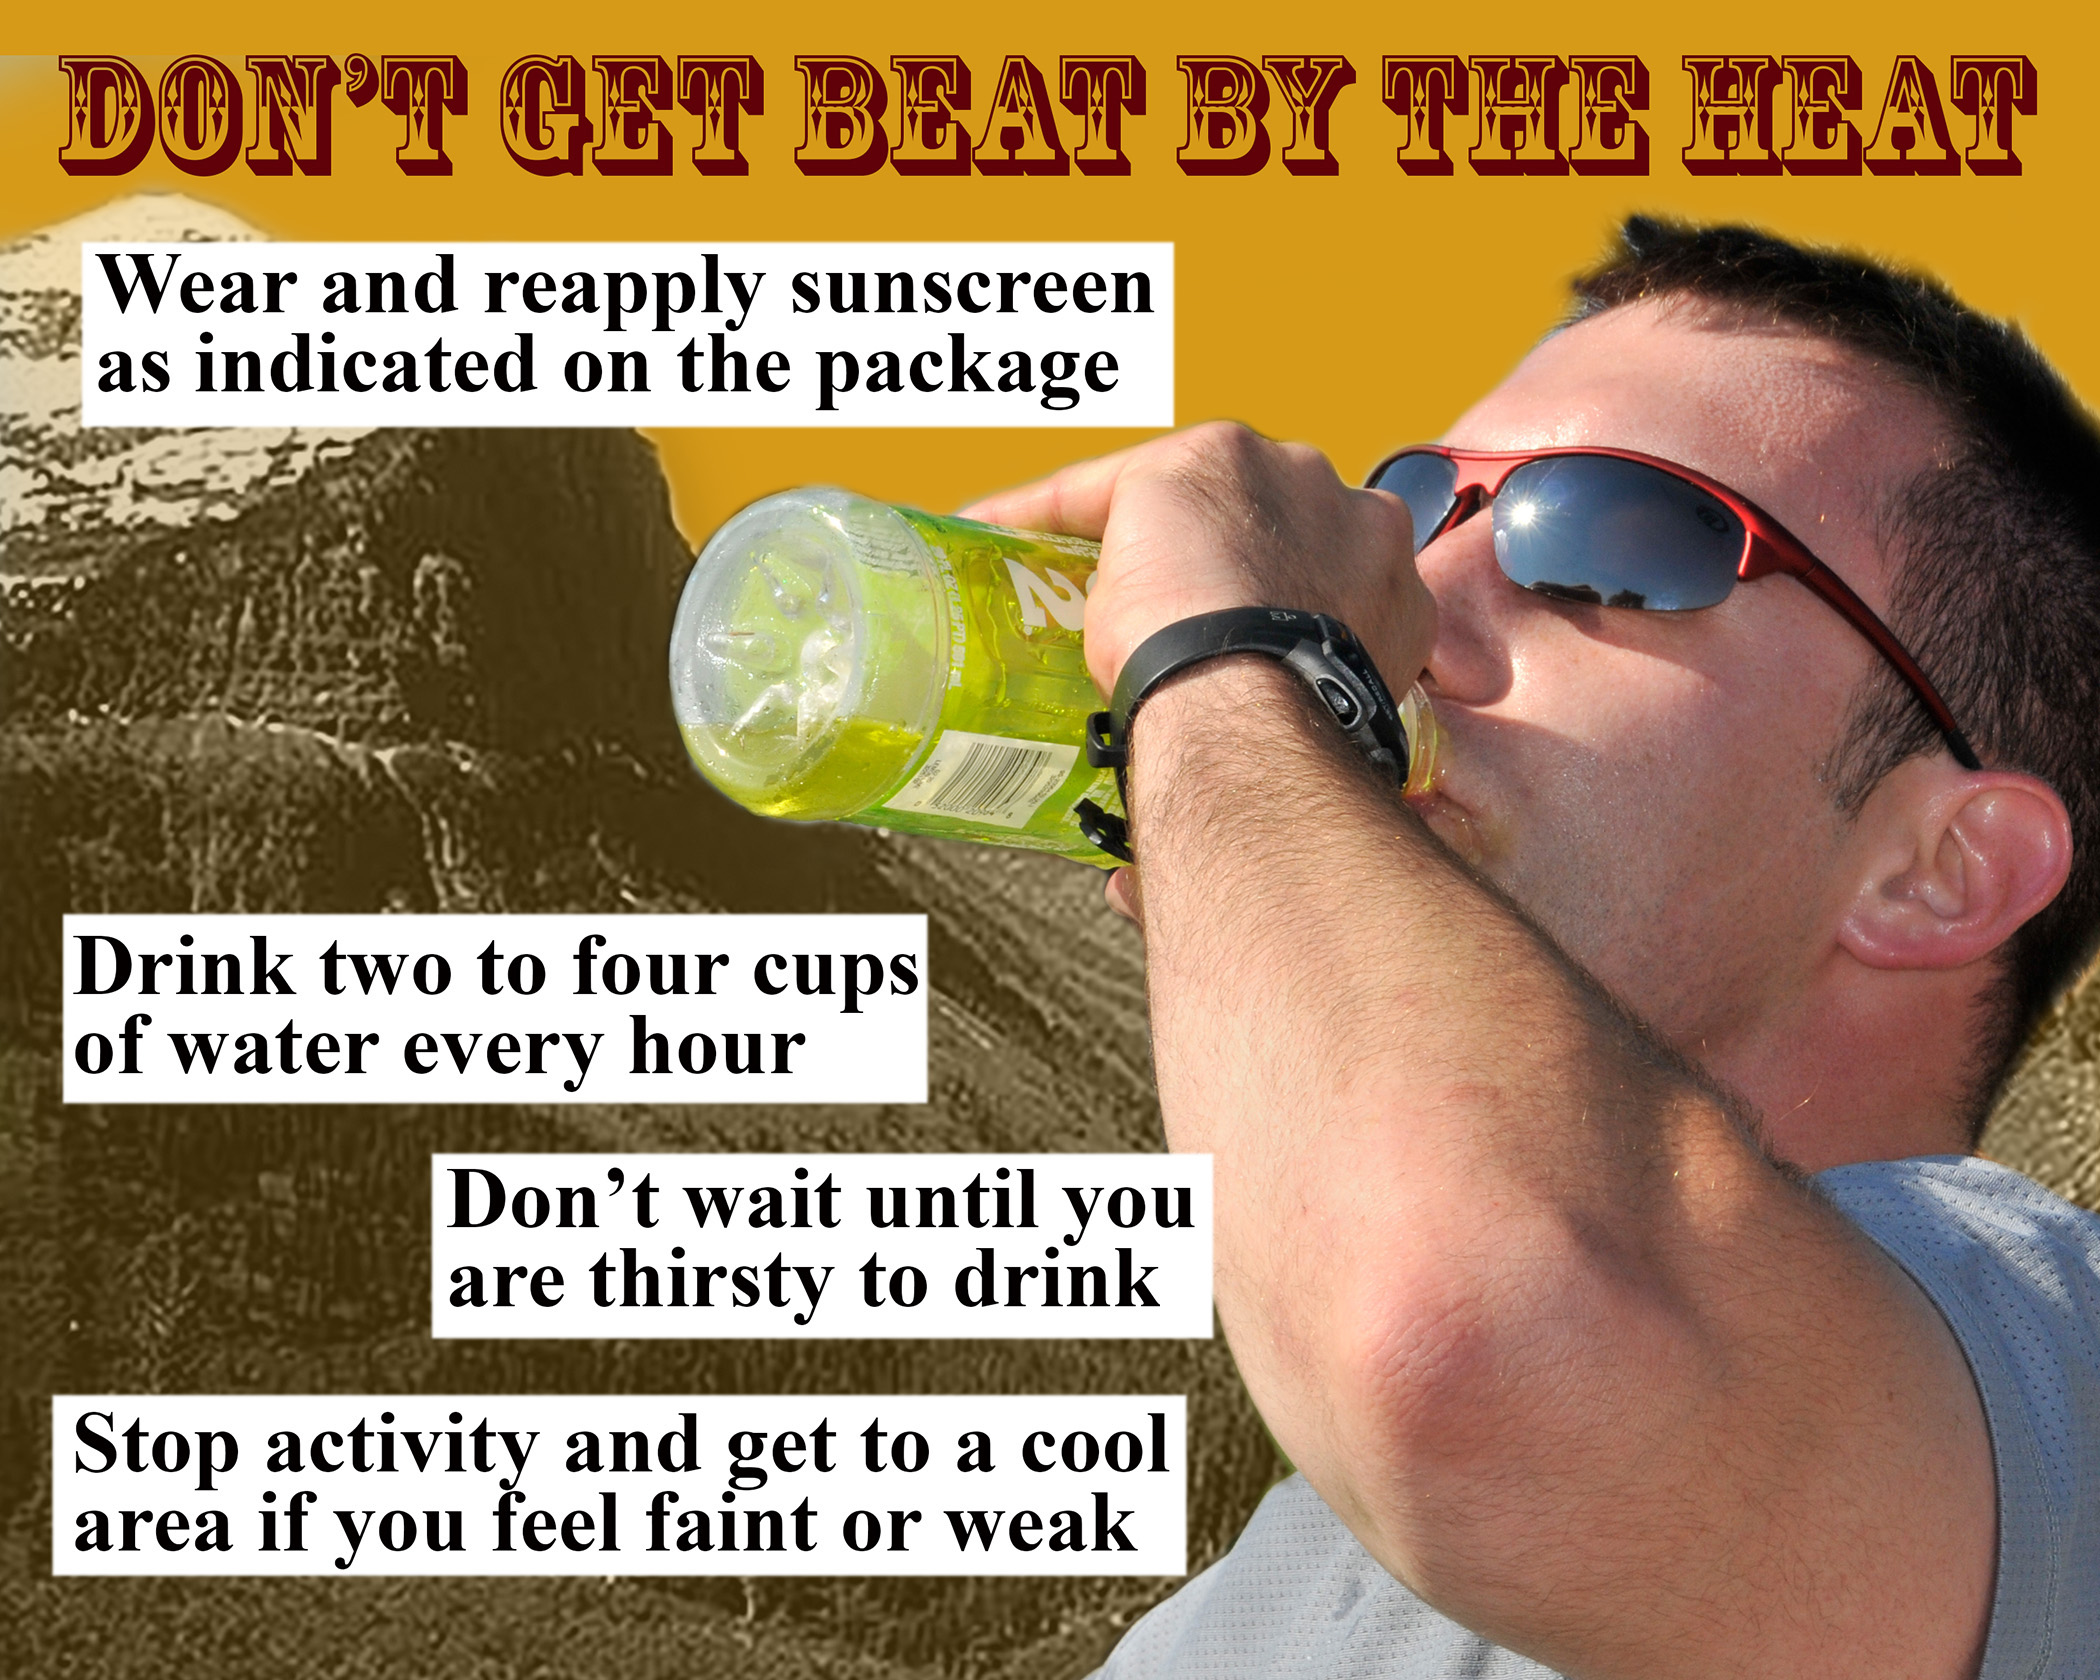 beat the heat rules